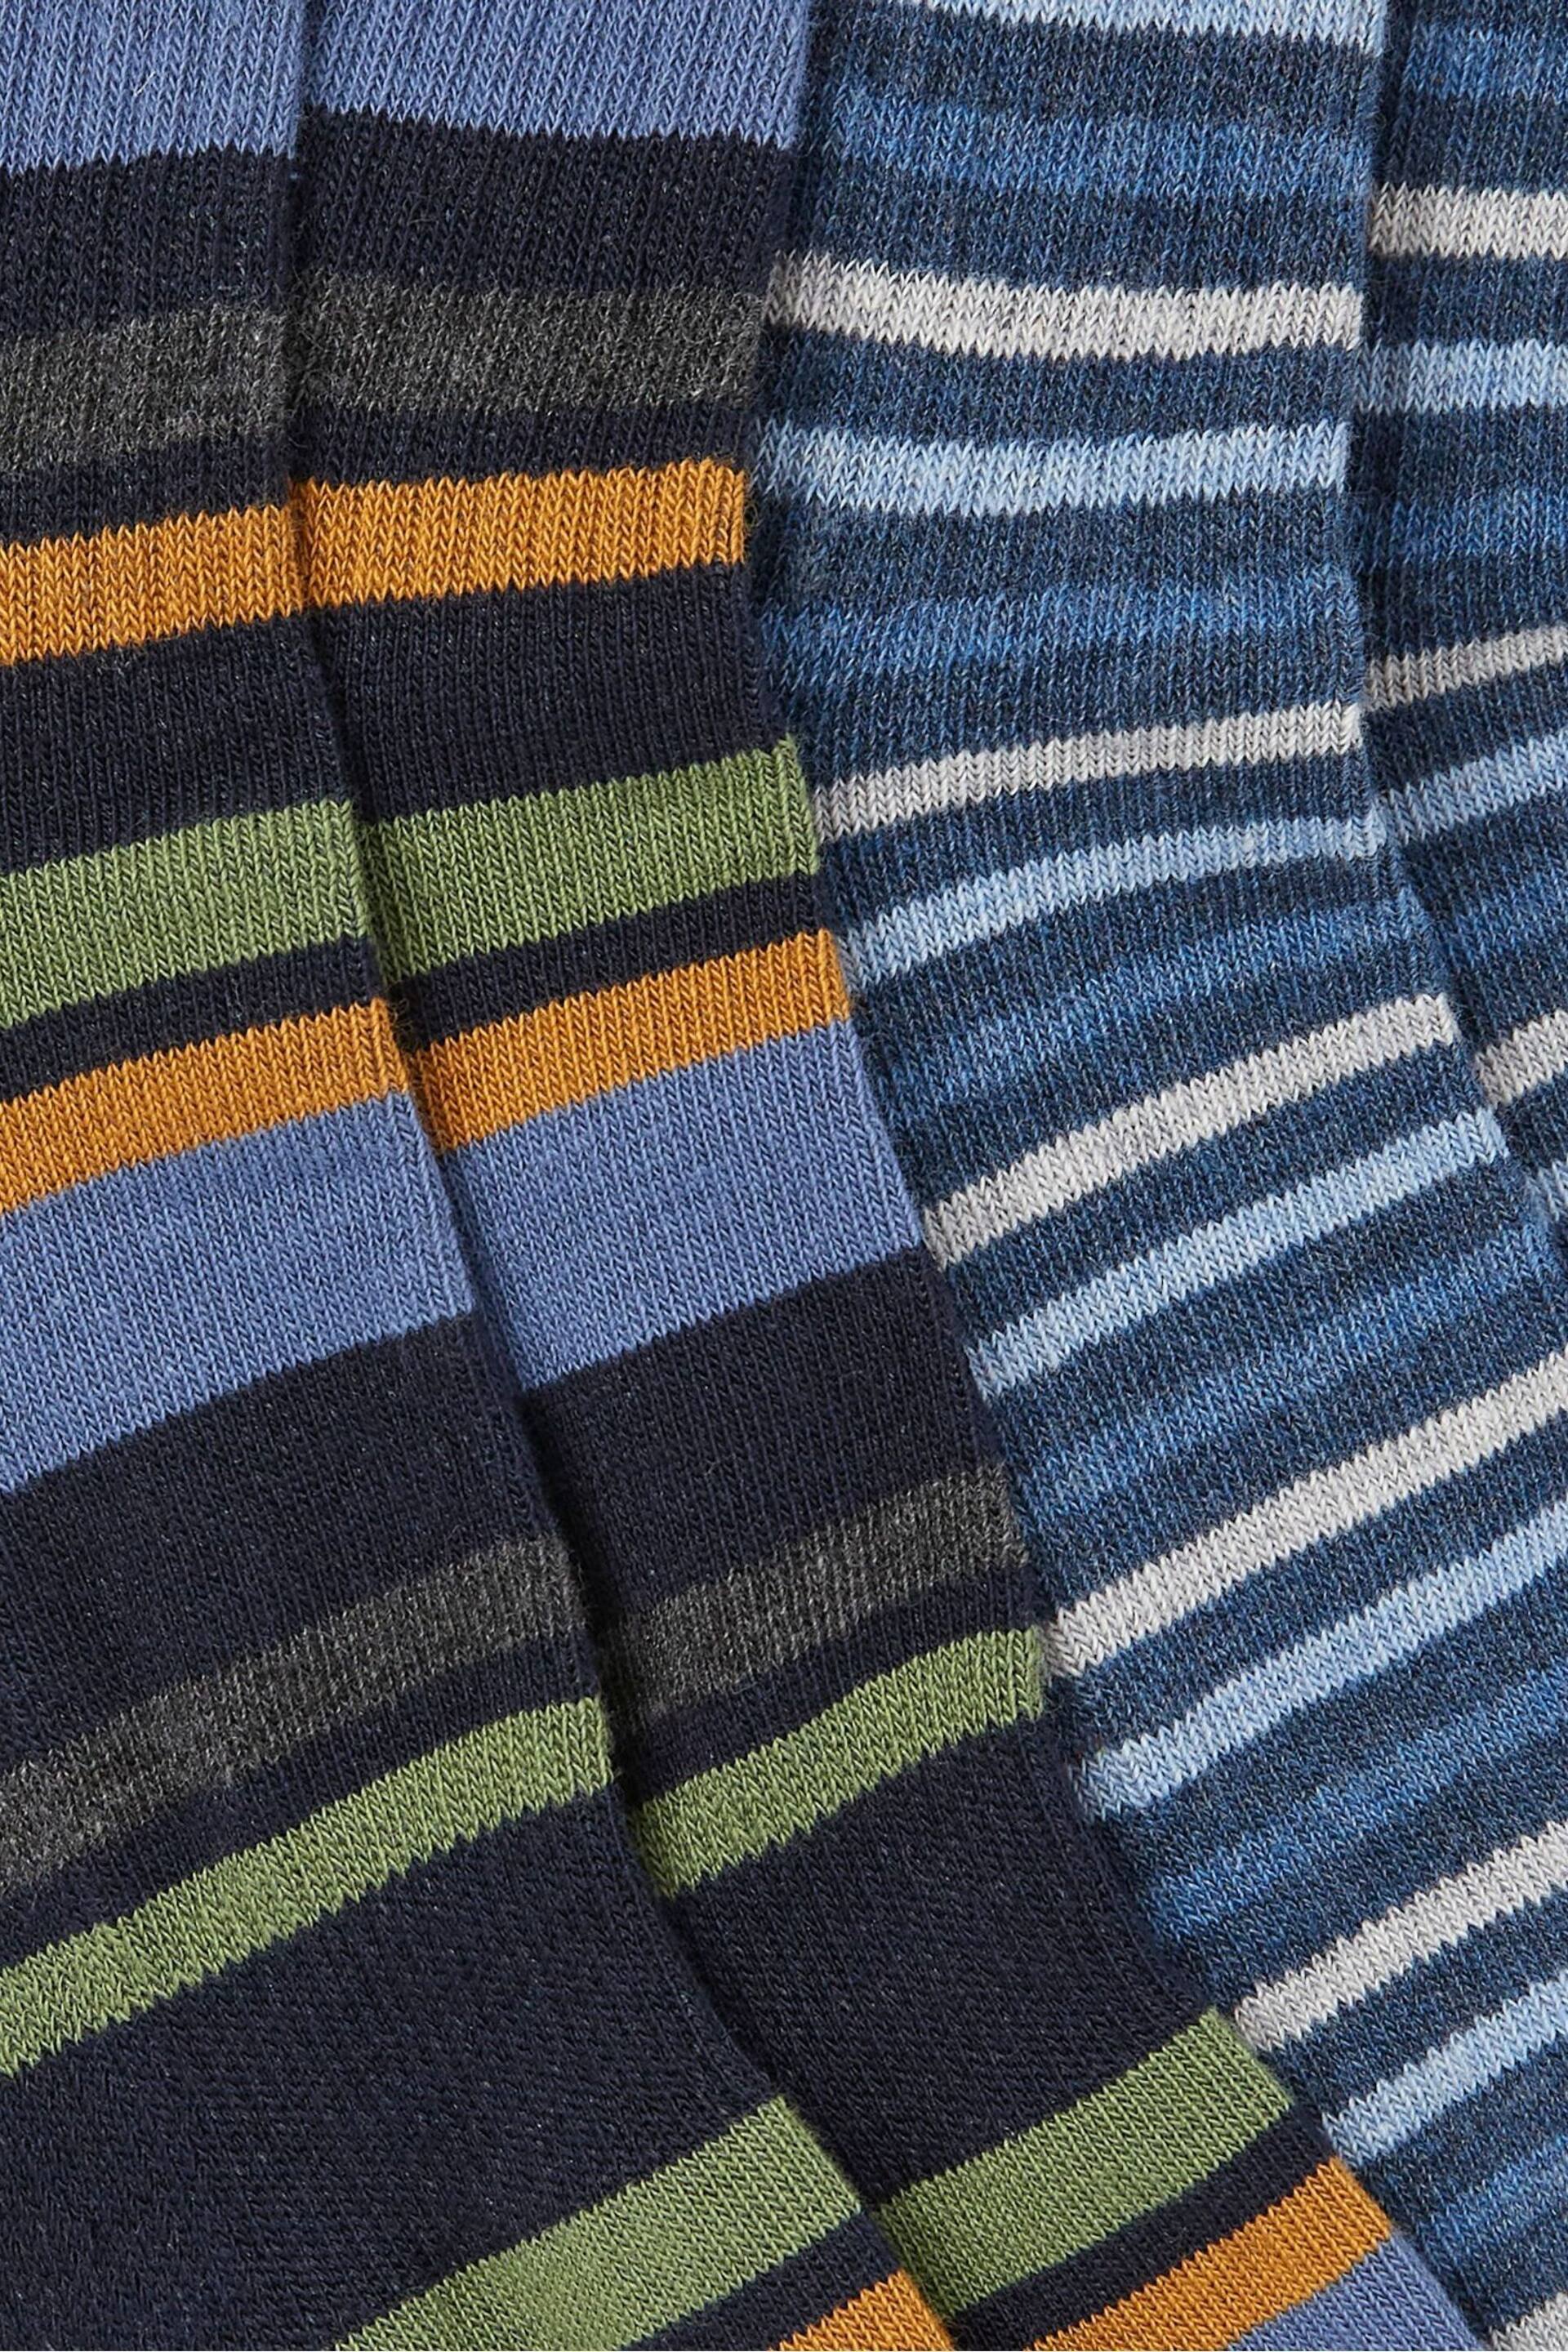 FatFace Blue Short Outdoor Socks 2 Pack - Image 2 of 2